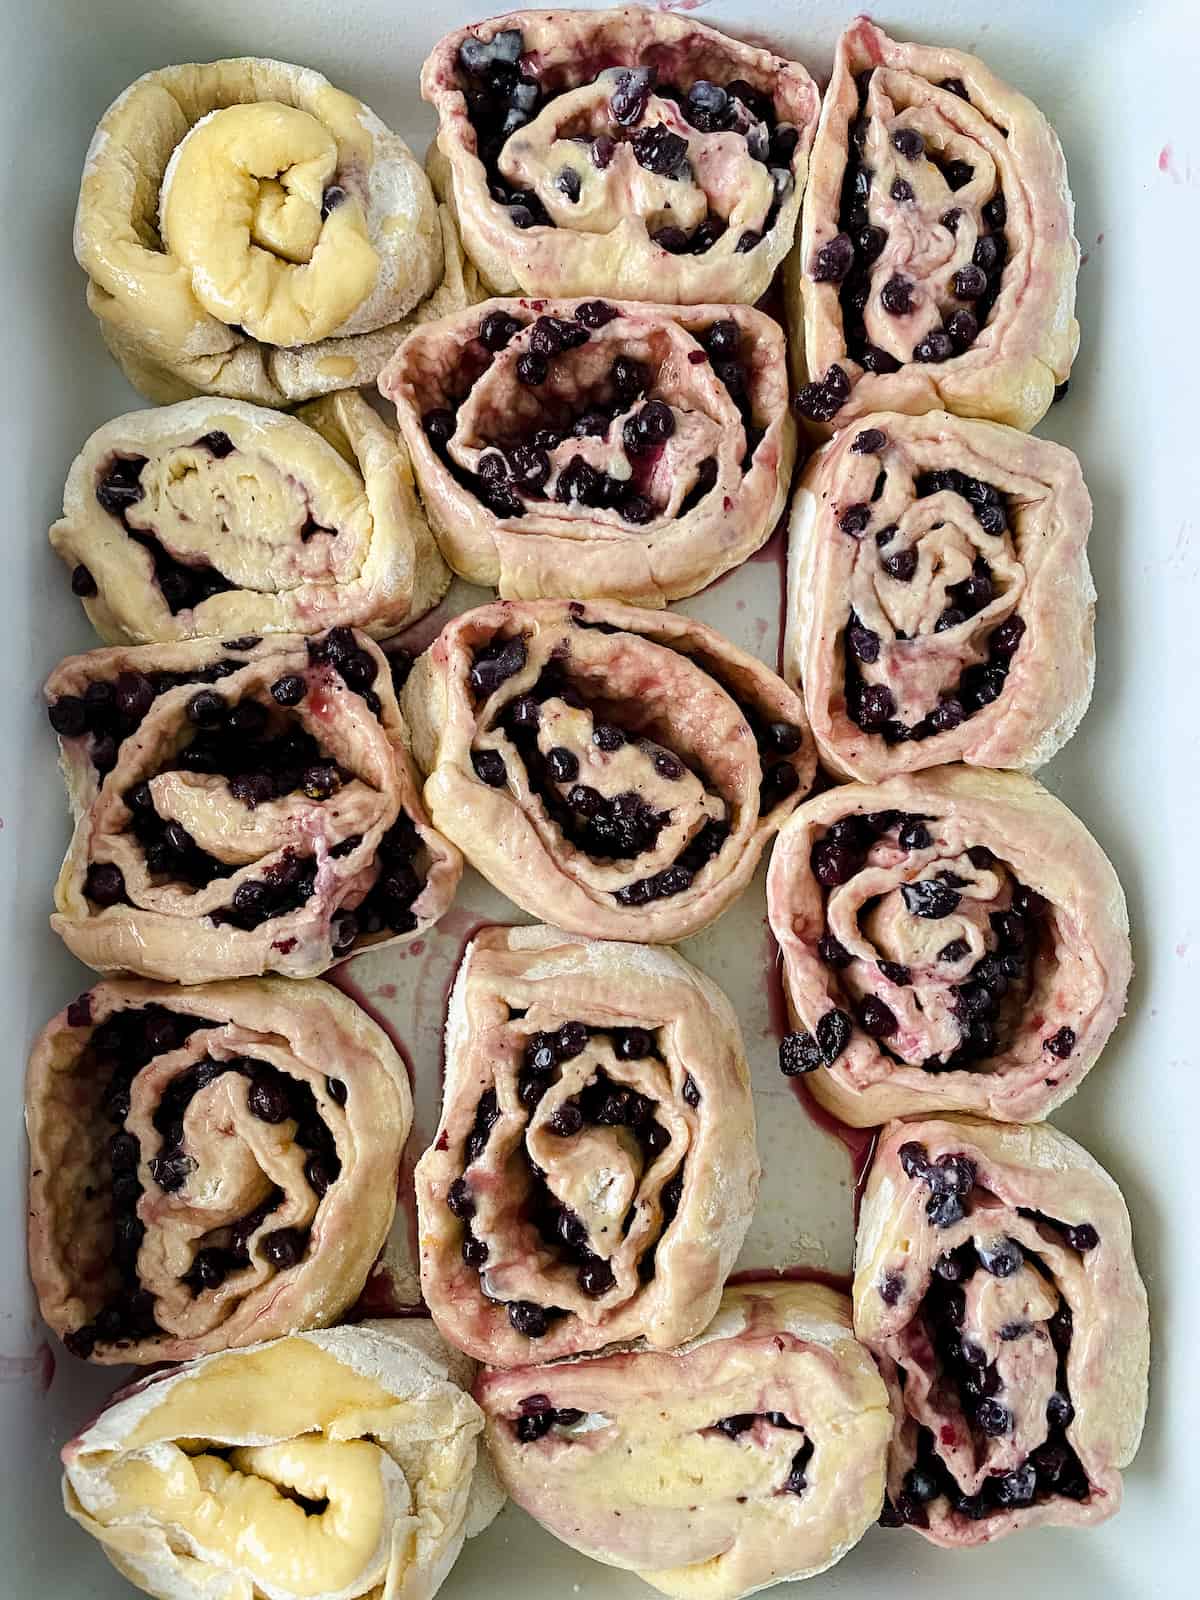 14 blueberry buns in a white baking dish before baking.